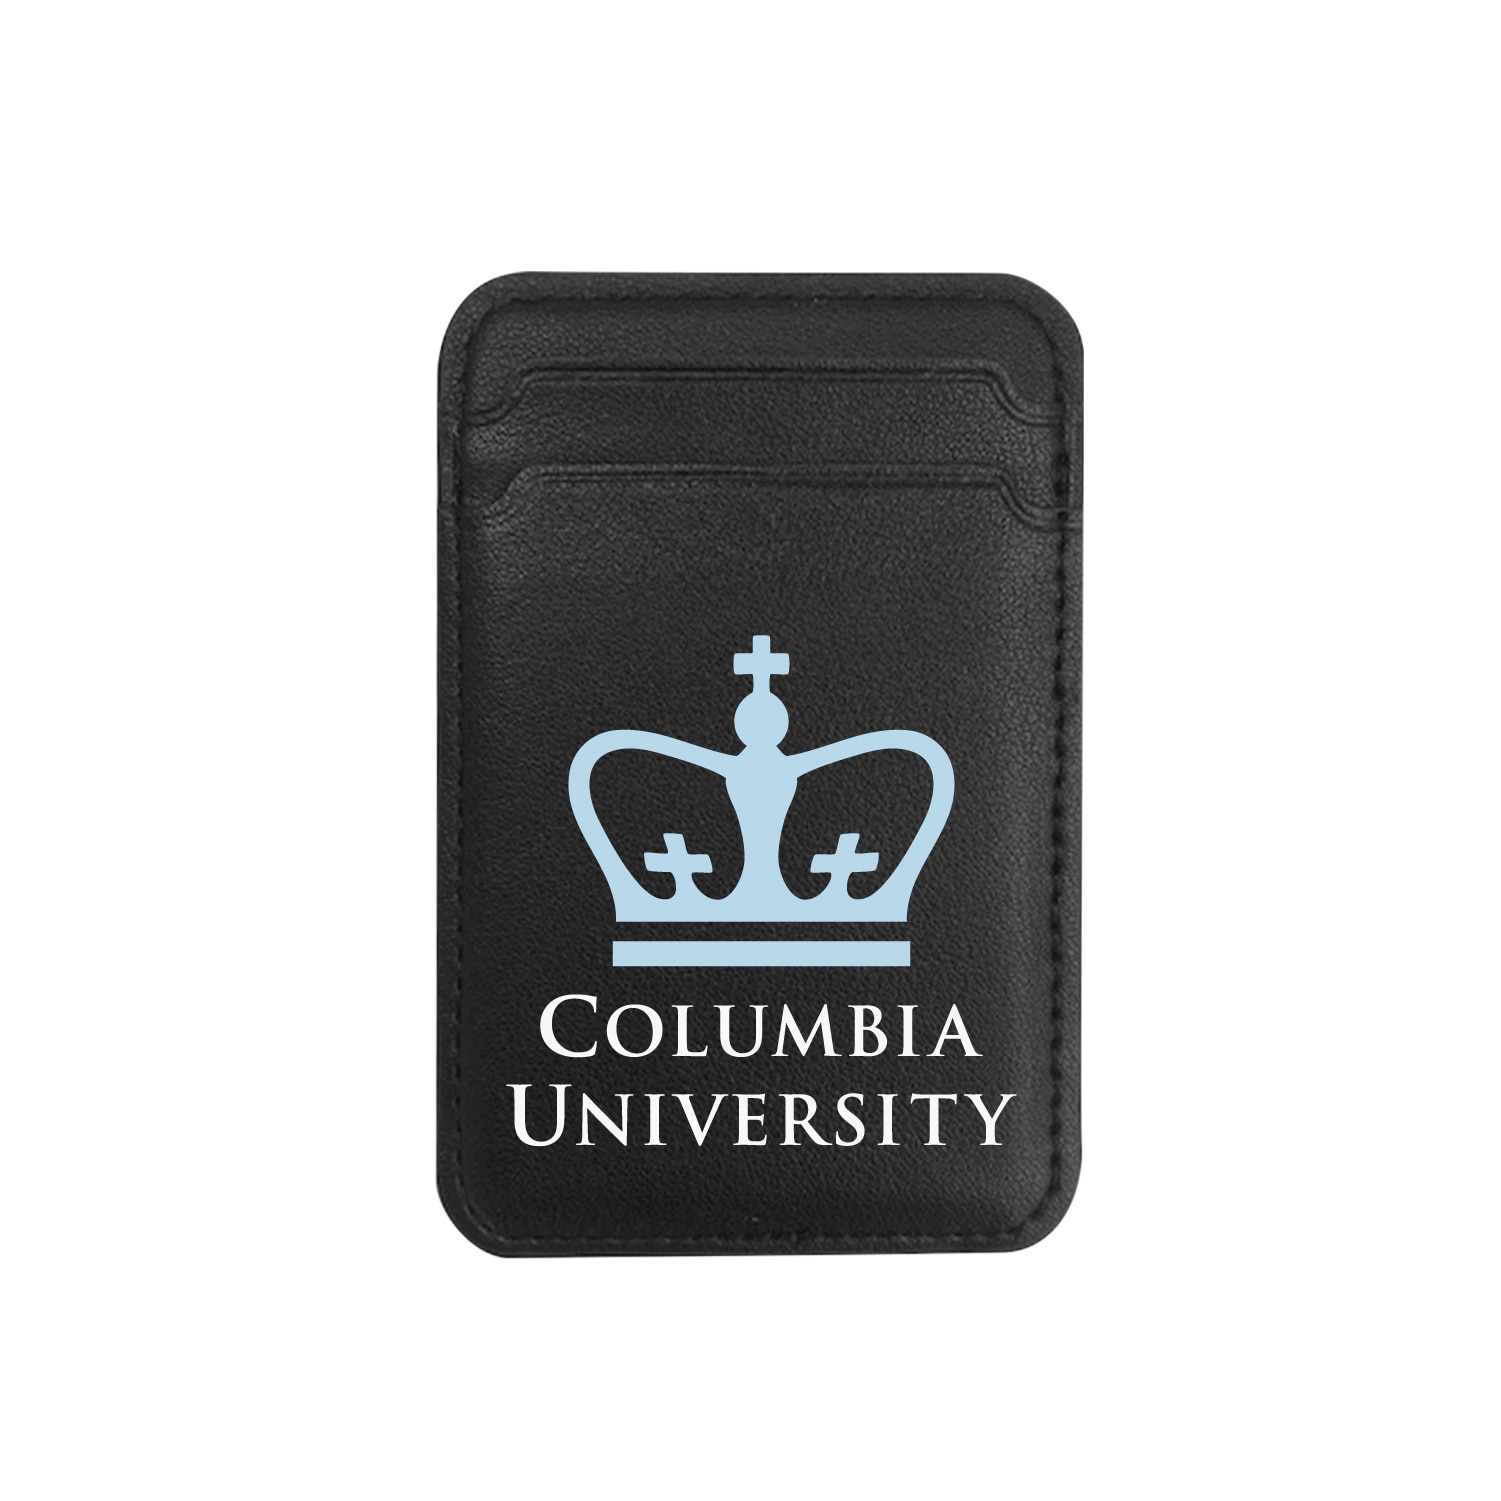 Columbia University - Leather Wallet Sleeve (Top Load, Mag Safe), Black, Classic V1